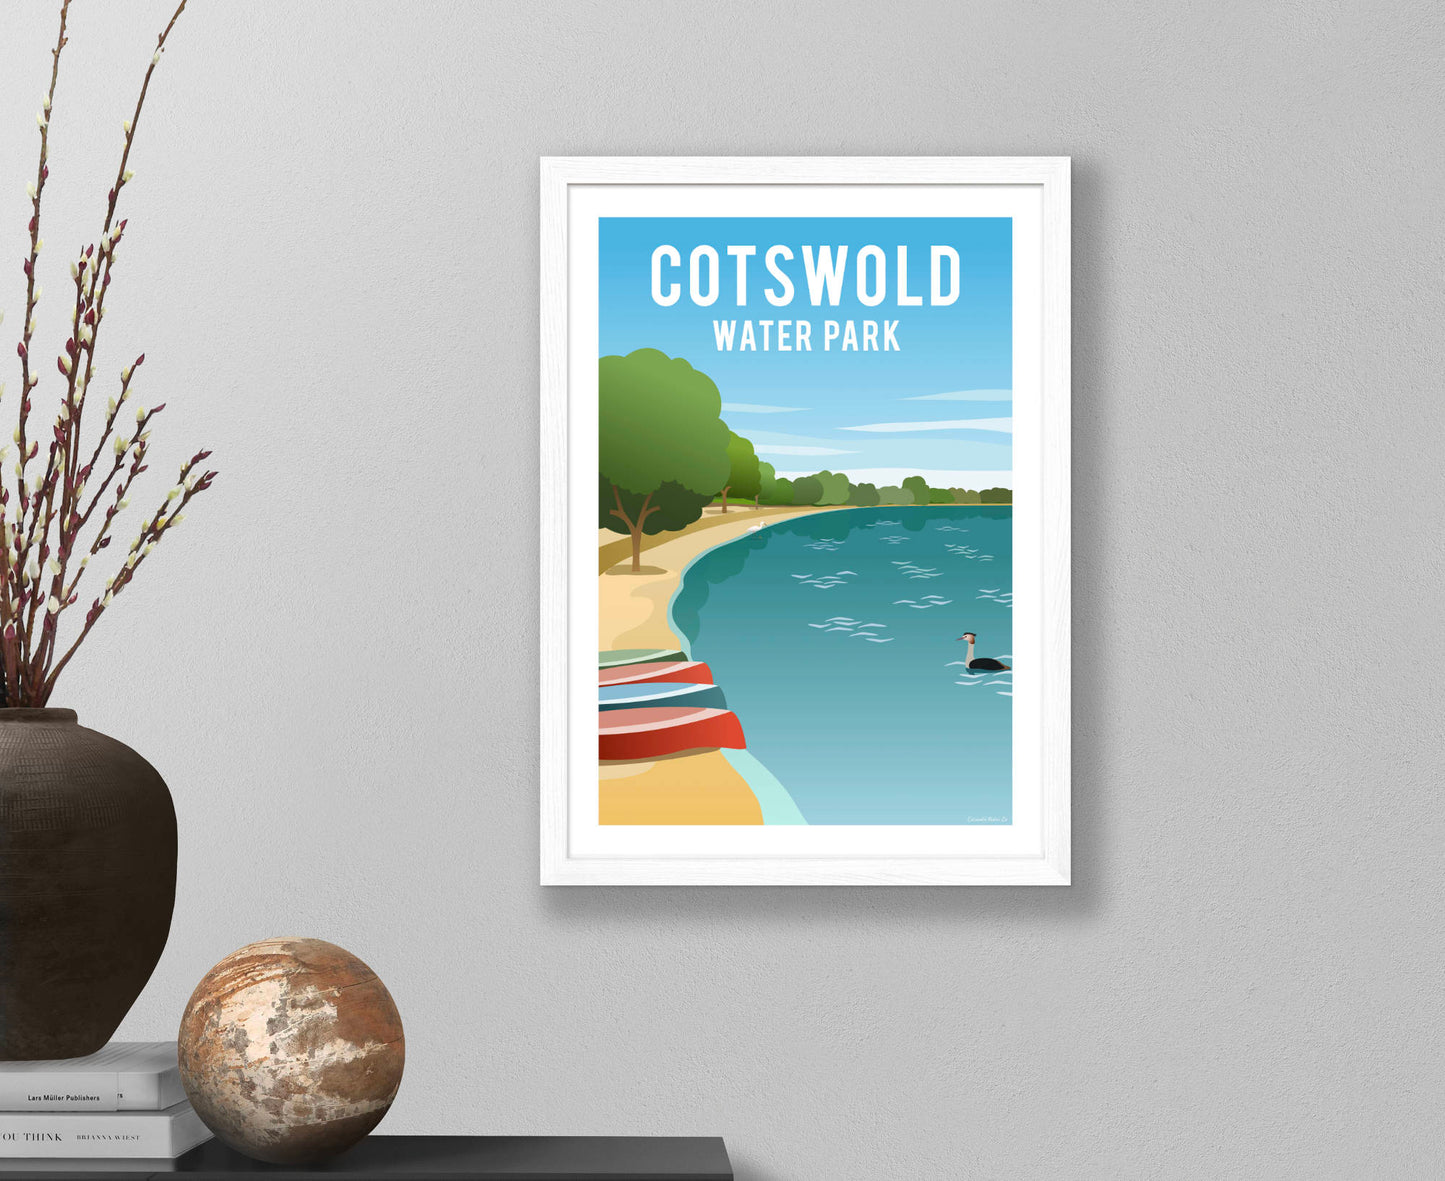 Cotswold Water Park Poster in white frame